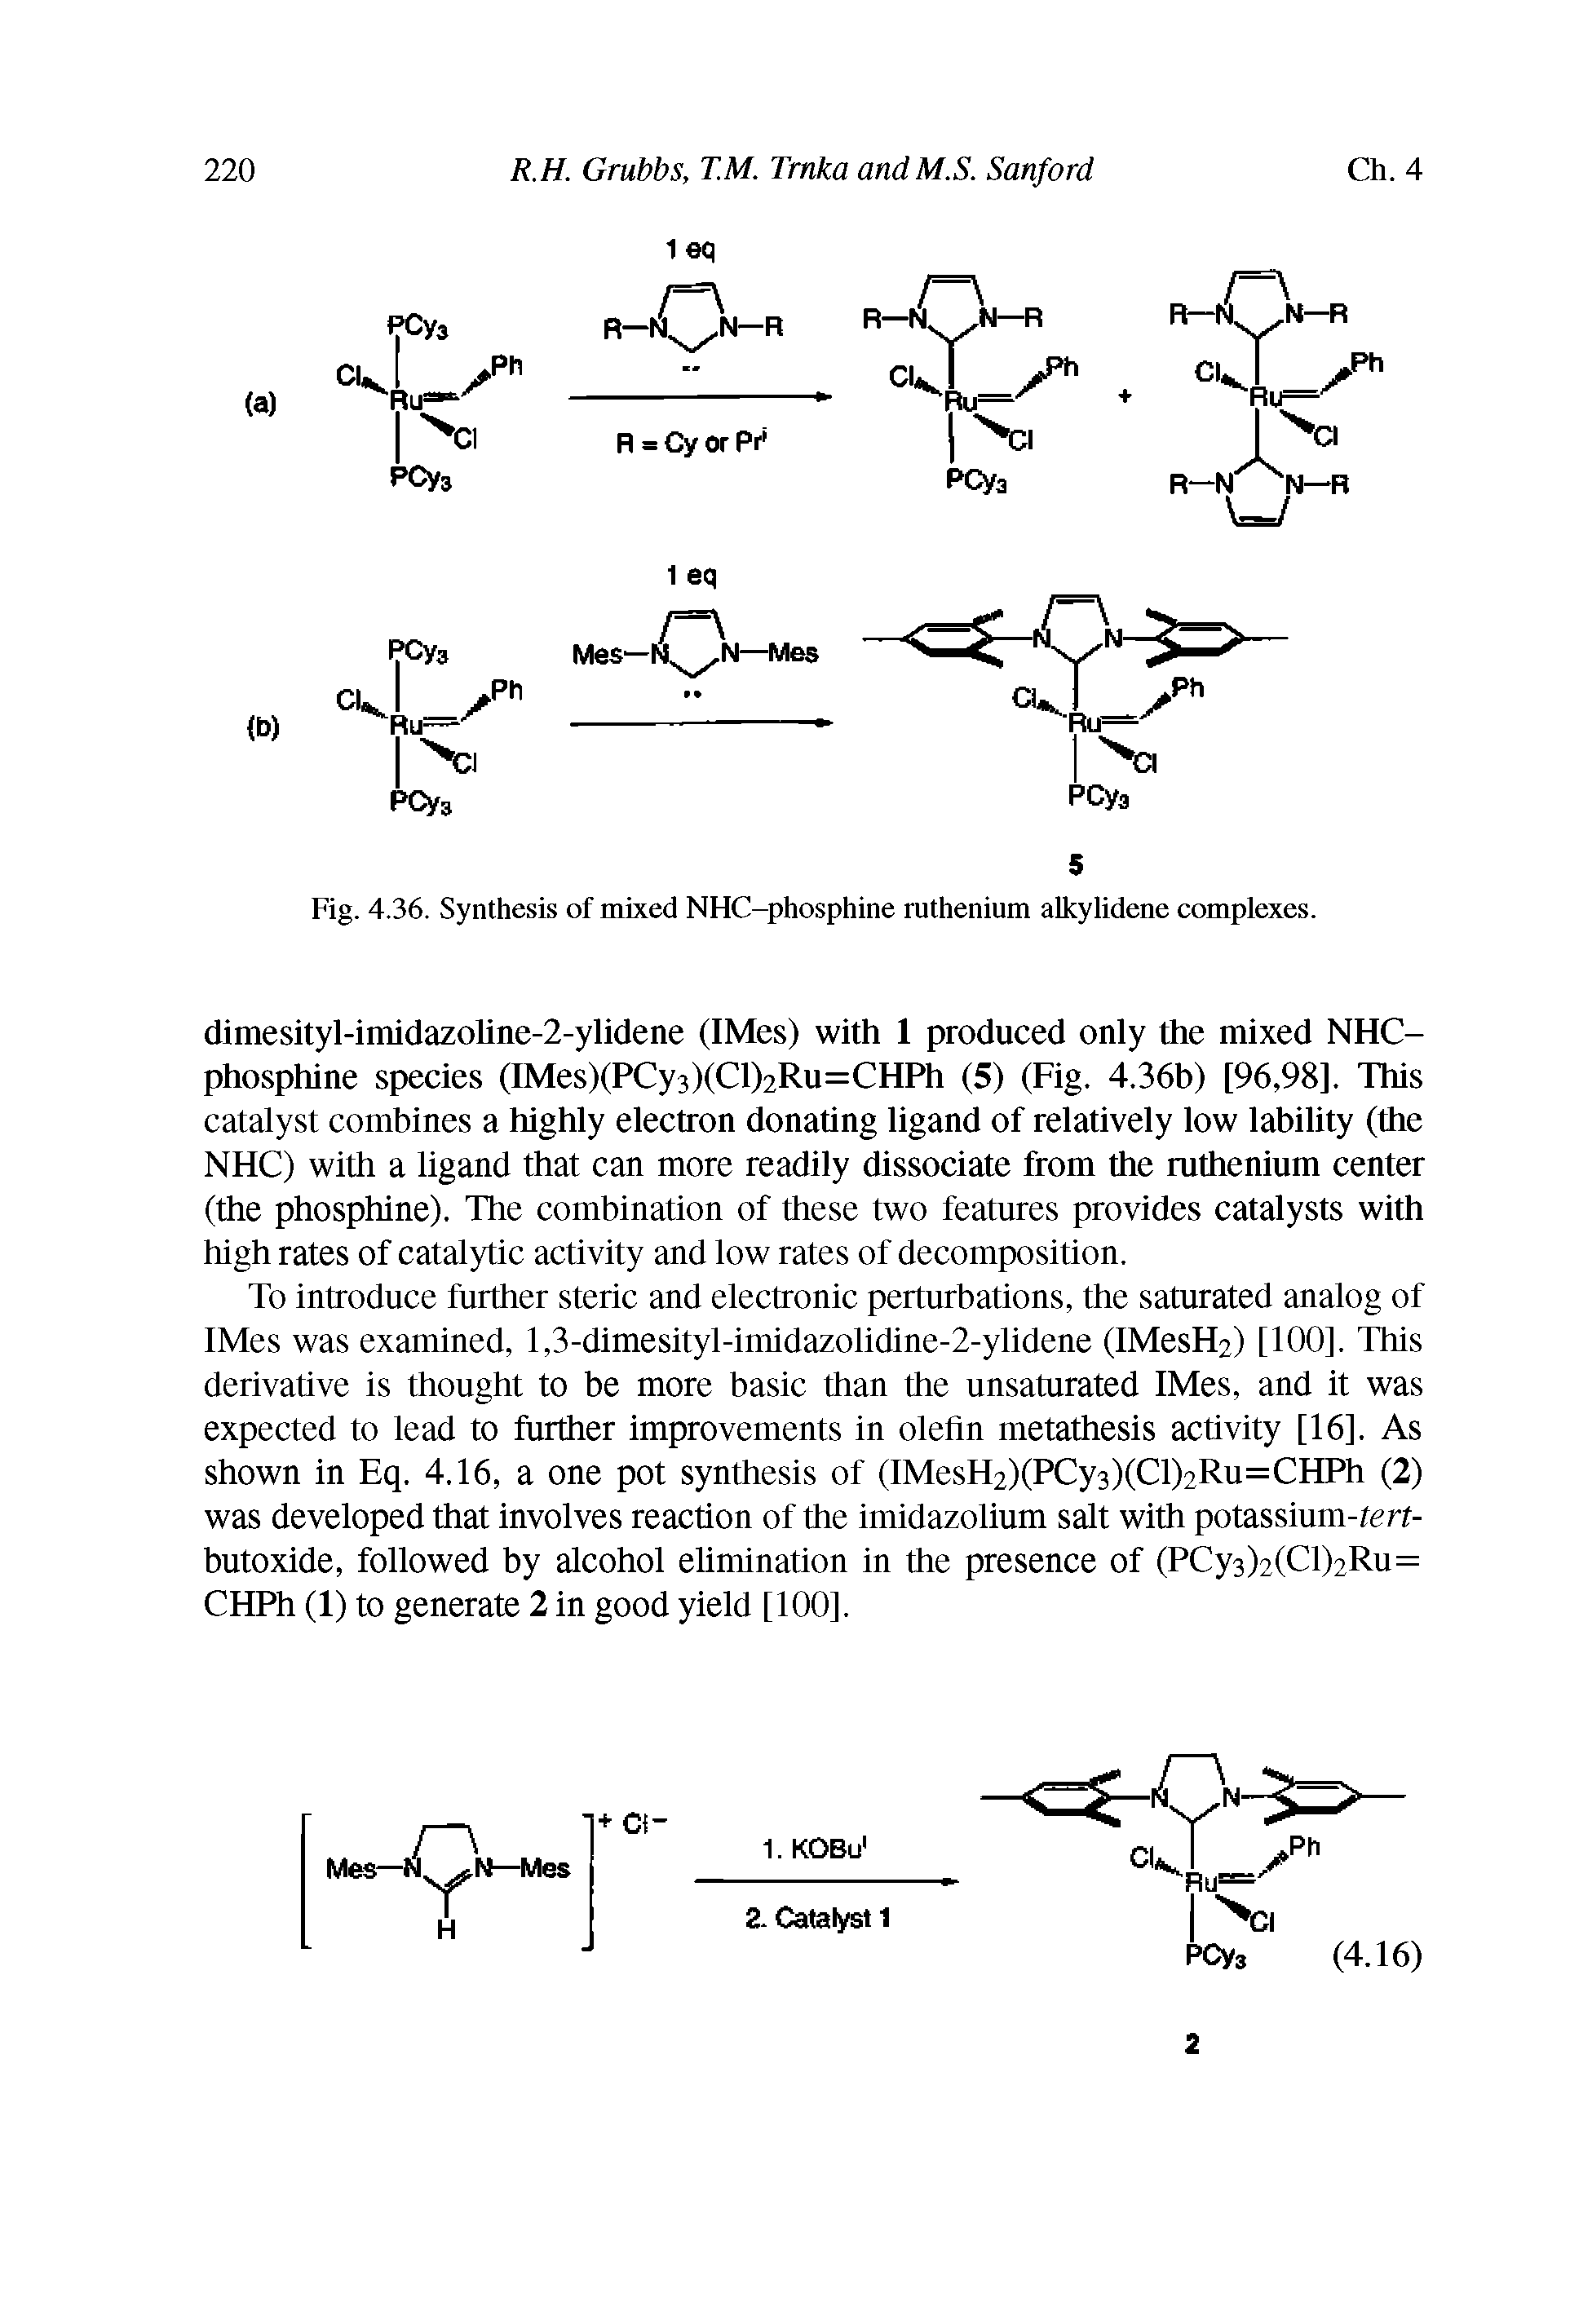 Fig. 4.36. Synthesis of mixed NHC-phosphine ruthenium alkylidene complexes.